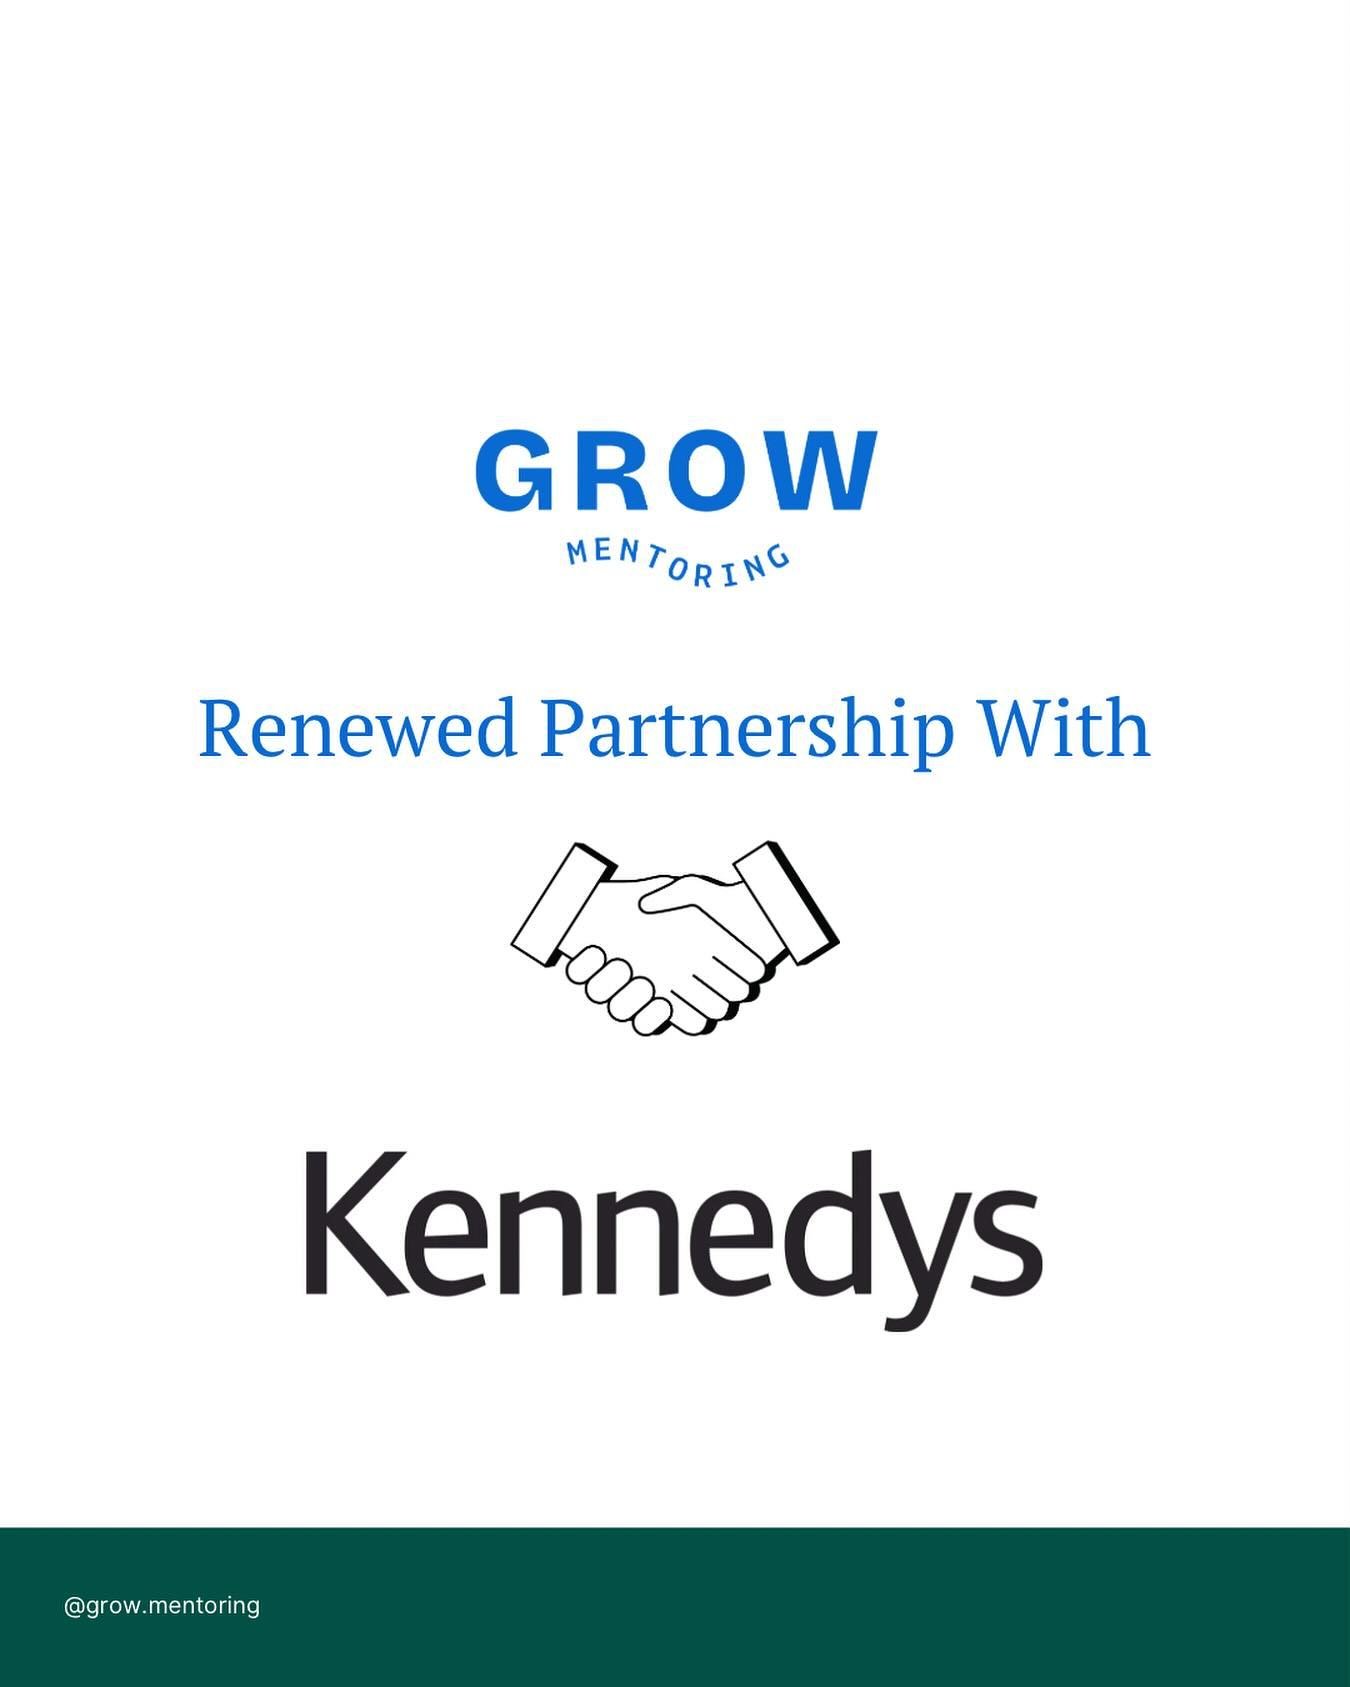 We have renewed our partnership with @kennedyslaw and are very excited to continue supporting our diverse community together&nbsp;🤝
&nbsp;
Since partnering in December 2022, we have:&nbsp;
&nbsp;
🎉&nbsp;paired more than 60 aspiring lawyers with Ken